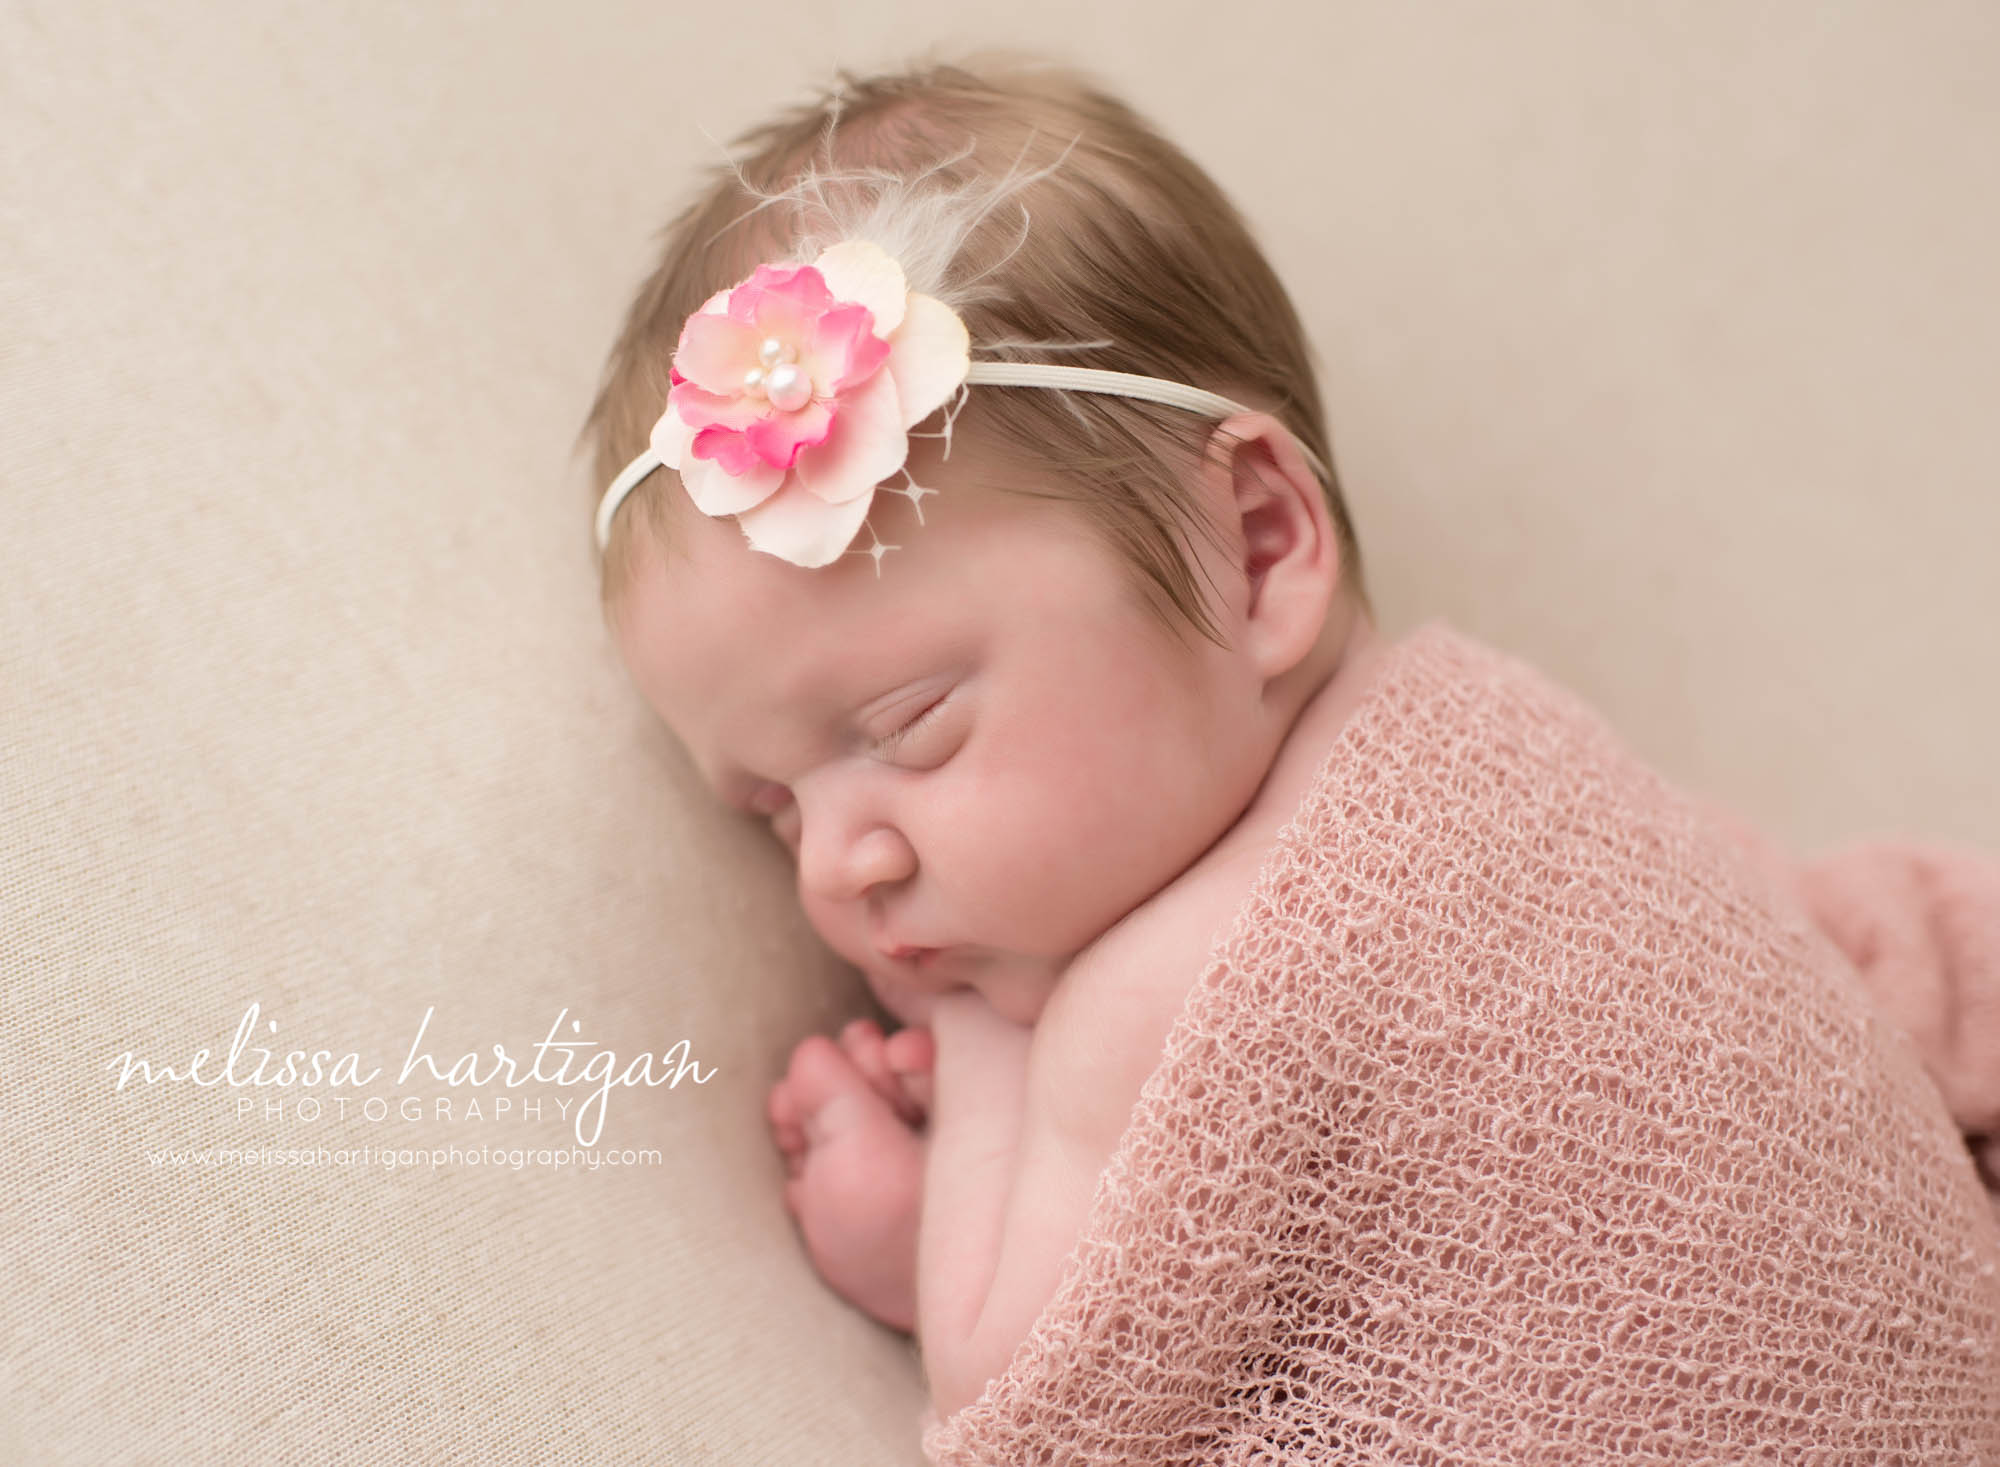 Melissa Hartigan Photography Connecticut Newborn twin Photographer Coventry Ct Middlefield CT baby Fairfield county Newborn and maternity CT photographer Newborn twin photographer baby girl sleeping with pink wrap head on hands wearing pink floral headband